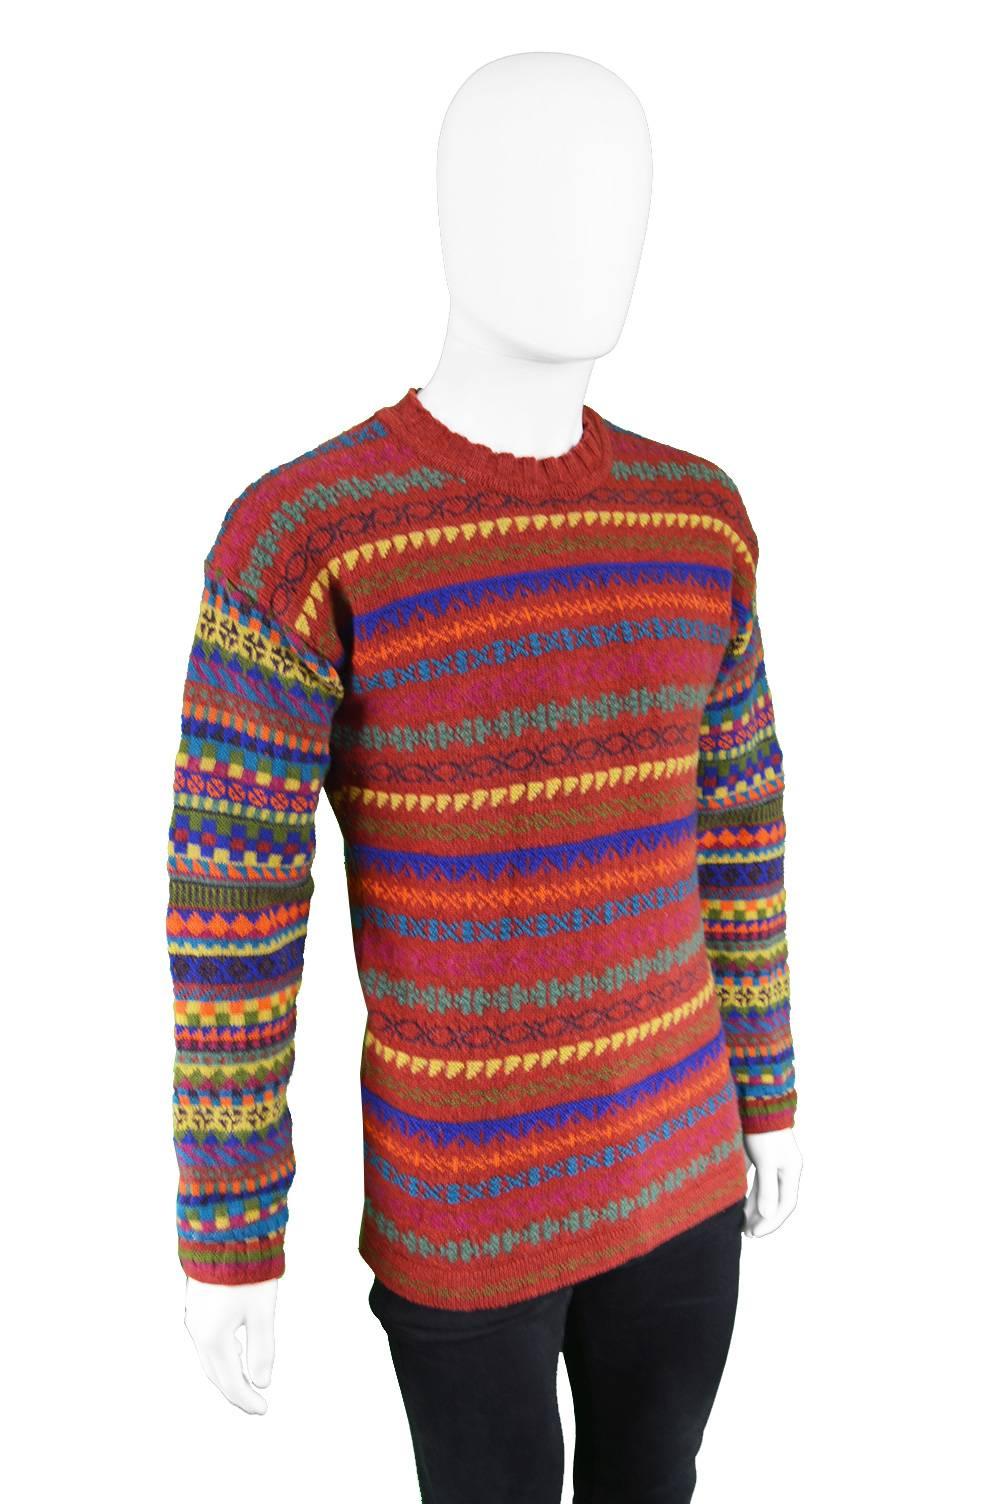 Kenzo Homme Men's Red Geometric Knit Vintage Panelled Sweater, 1980s In Excellent Condition For Sale In Doncaster, South Yorkshire